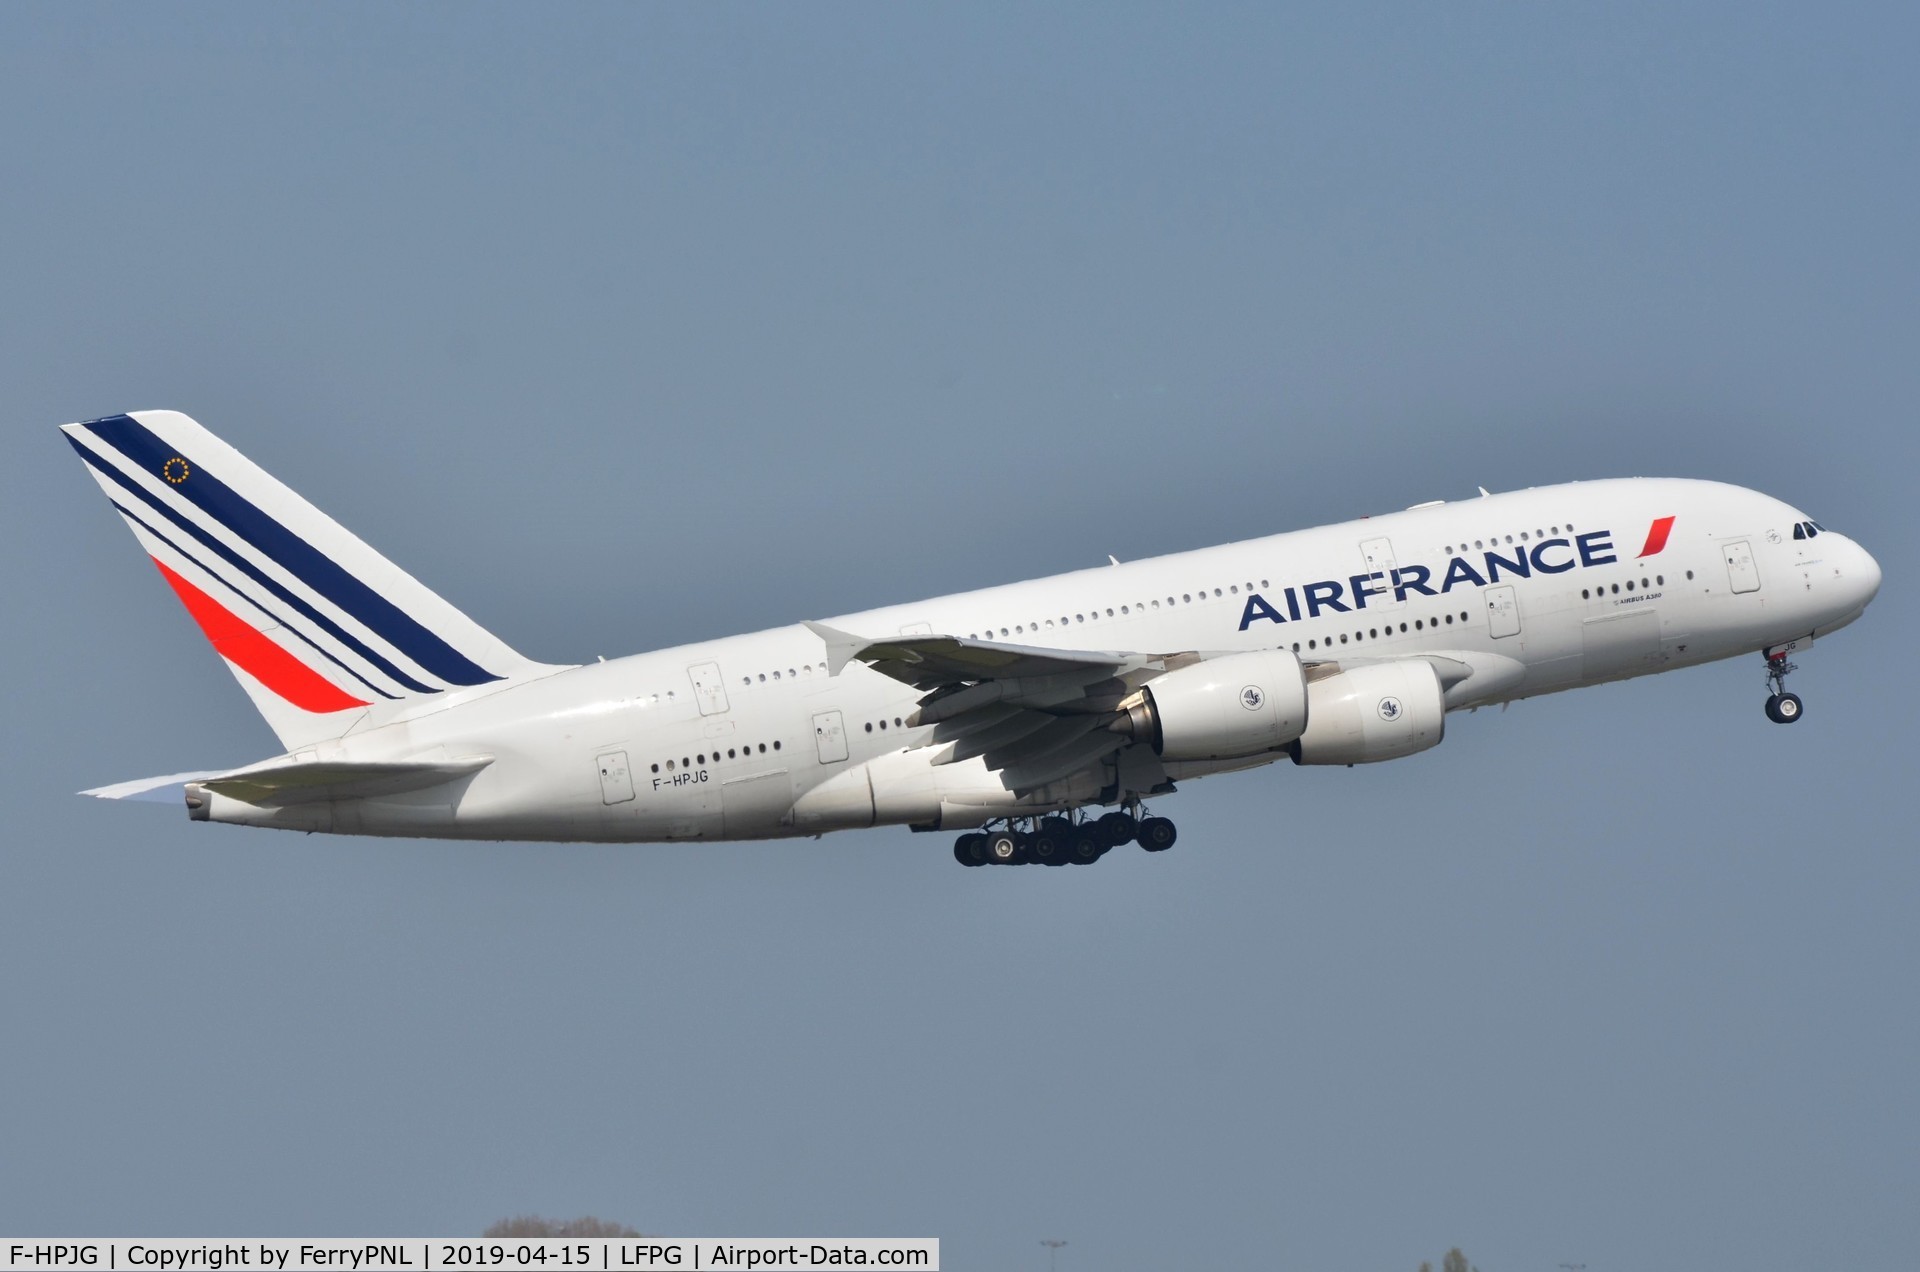 F-HPJG, 2011 Airbus A380-861 C/N 067, Take-off of Air France A388